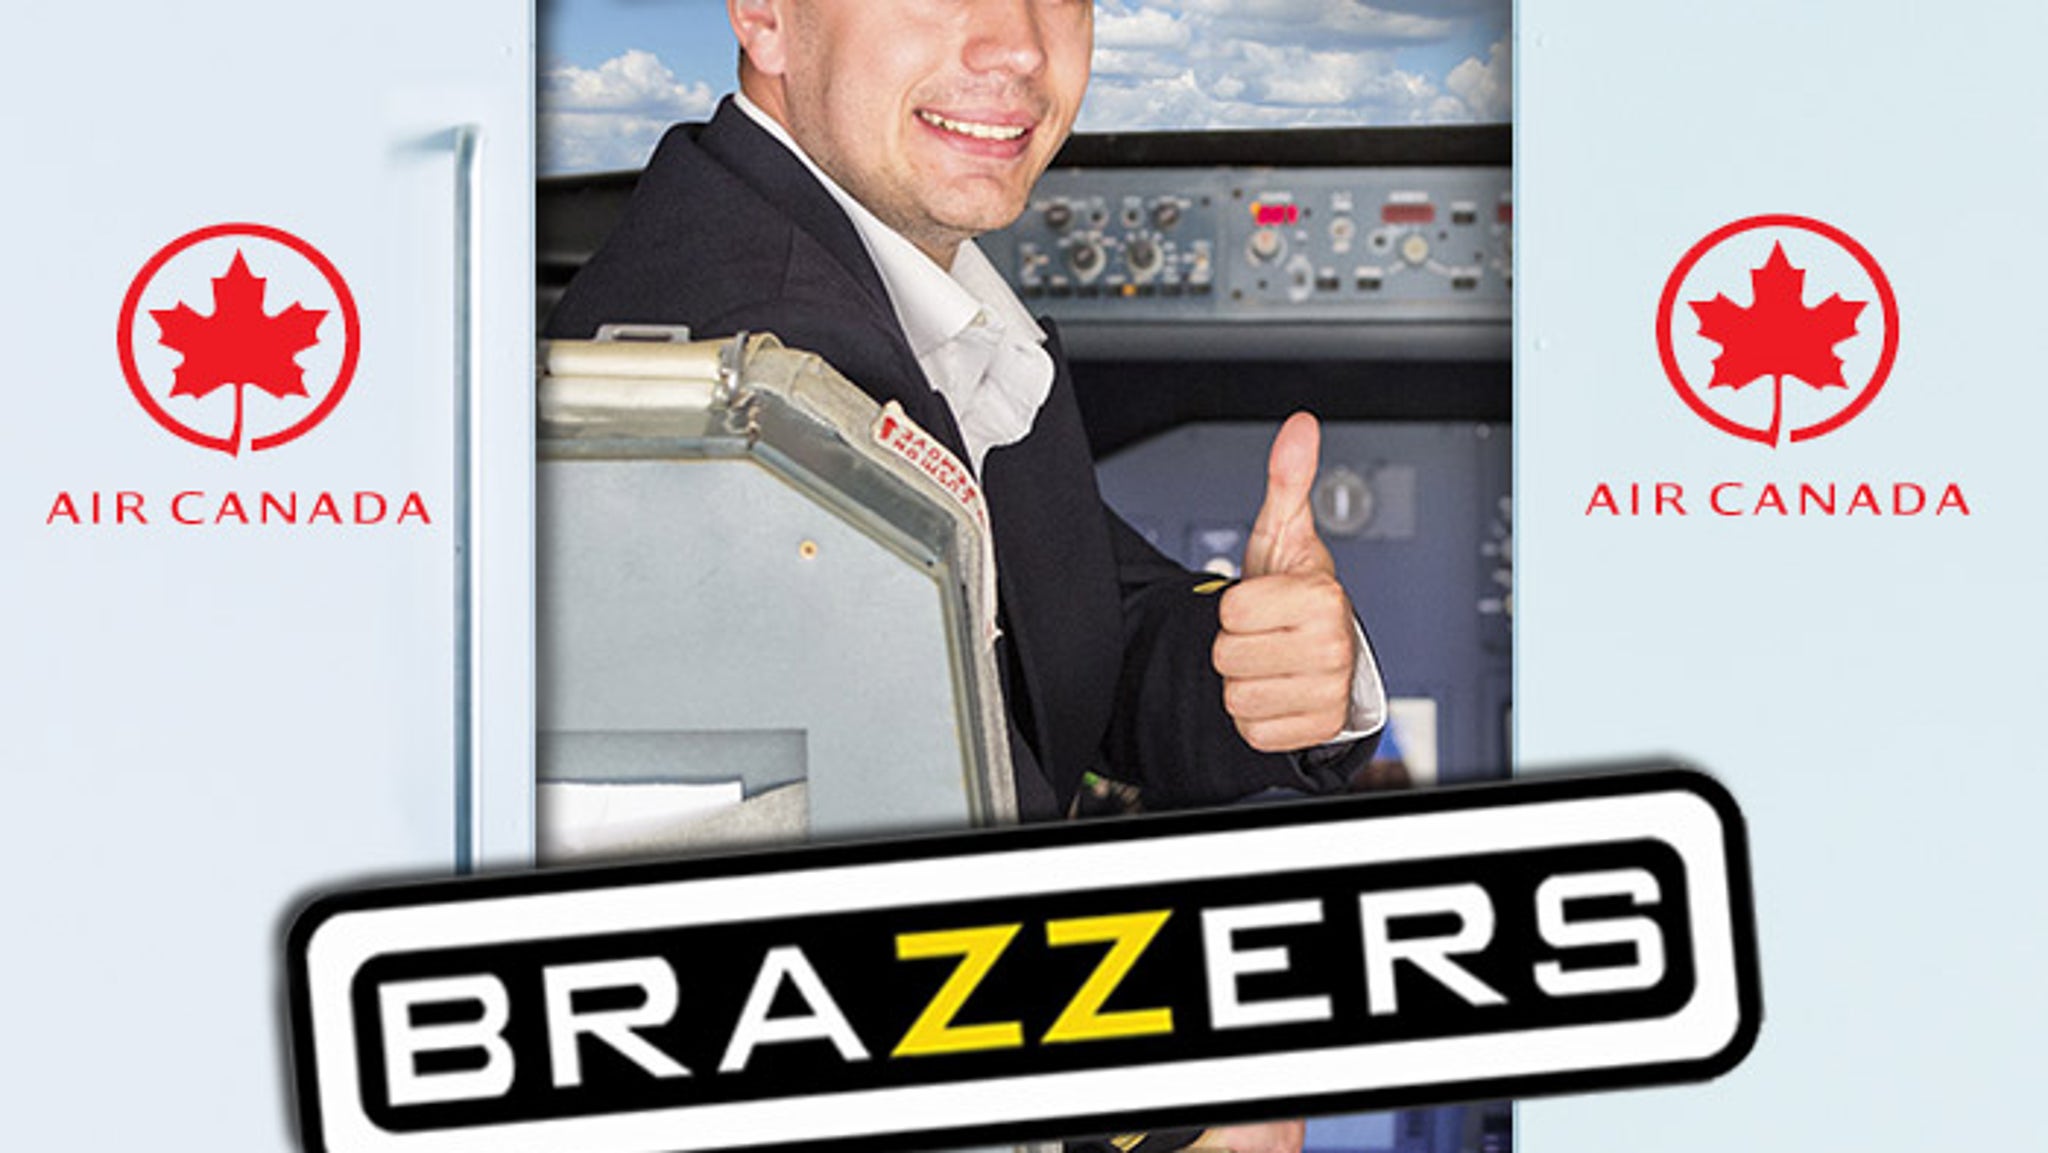 Company Brazzers - Air Canada Pilots -- We Got Your Wings Covered ... Says XXX Company